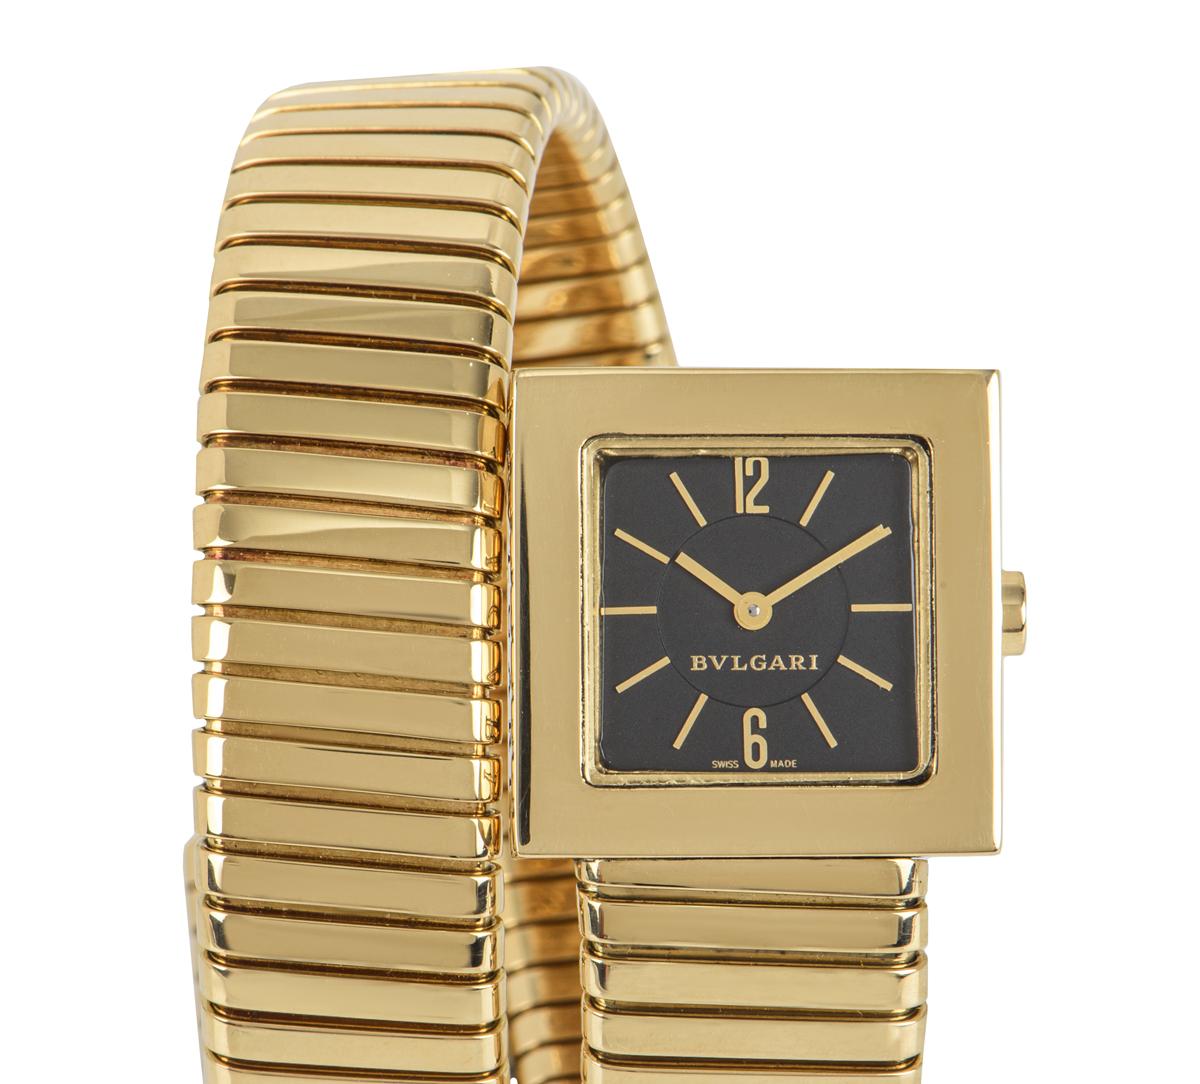 A women's yellow gold 22mm Quadrato Tubogas with a black dial concealed by sapphire glass. The case has an unusual square bezel which is 18-carat yellow gold.

Featuring an iconic yellow gold snake style bracelet gives this the potential to be a